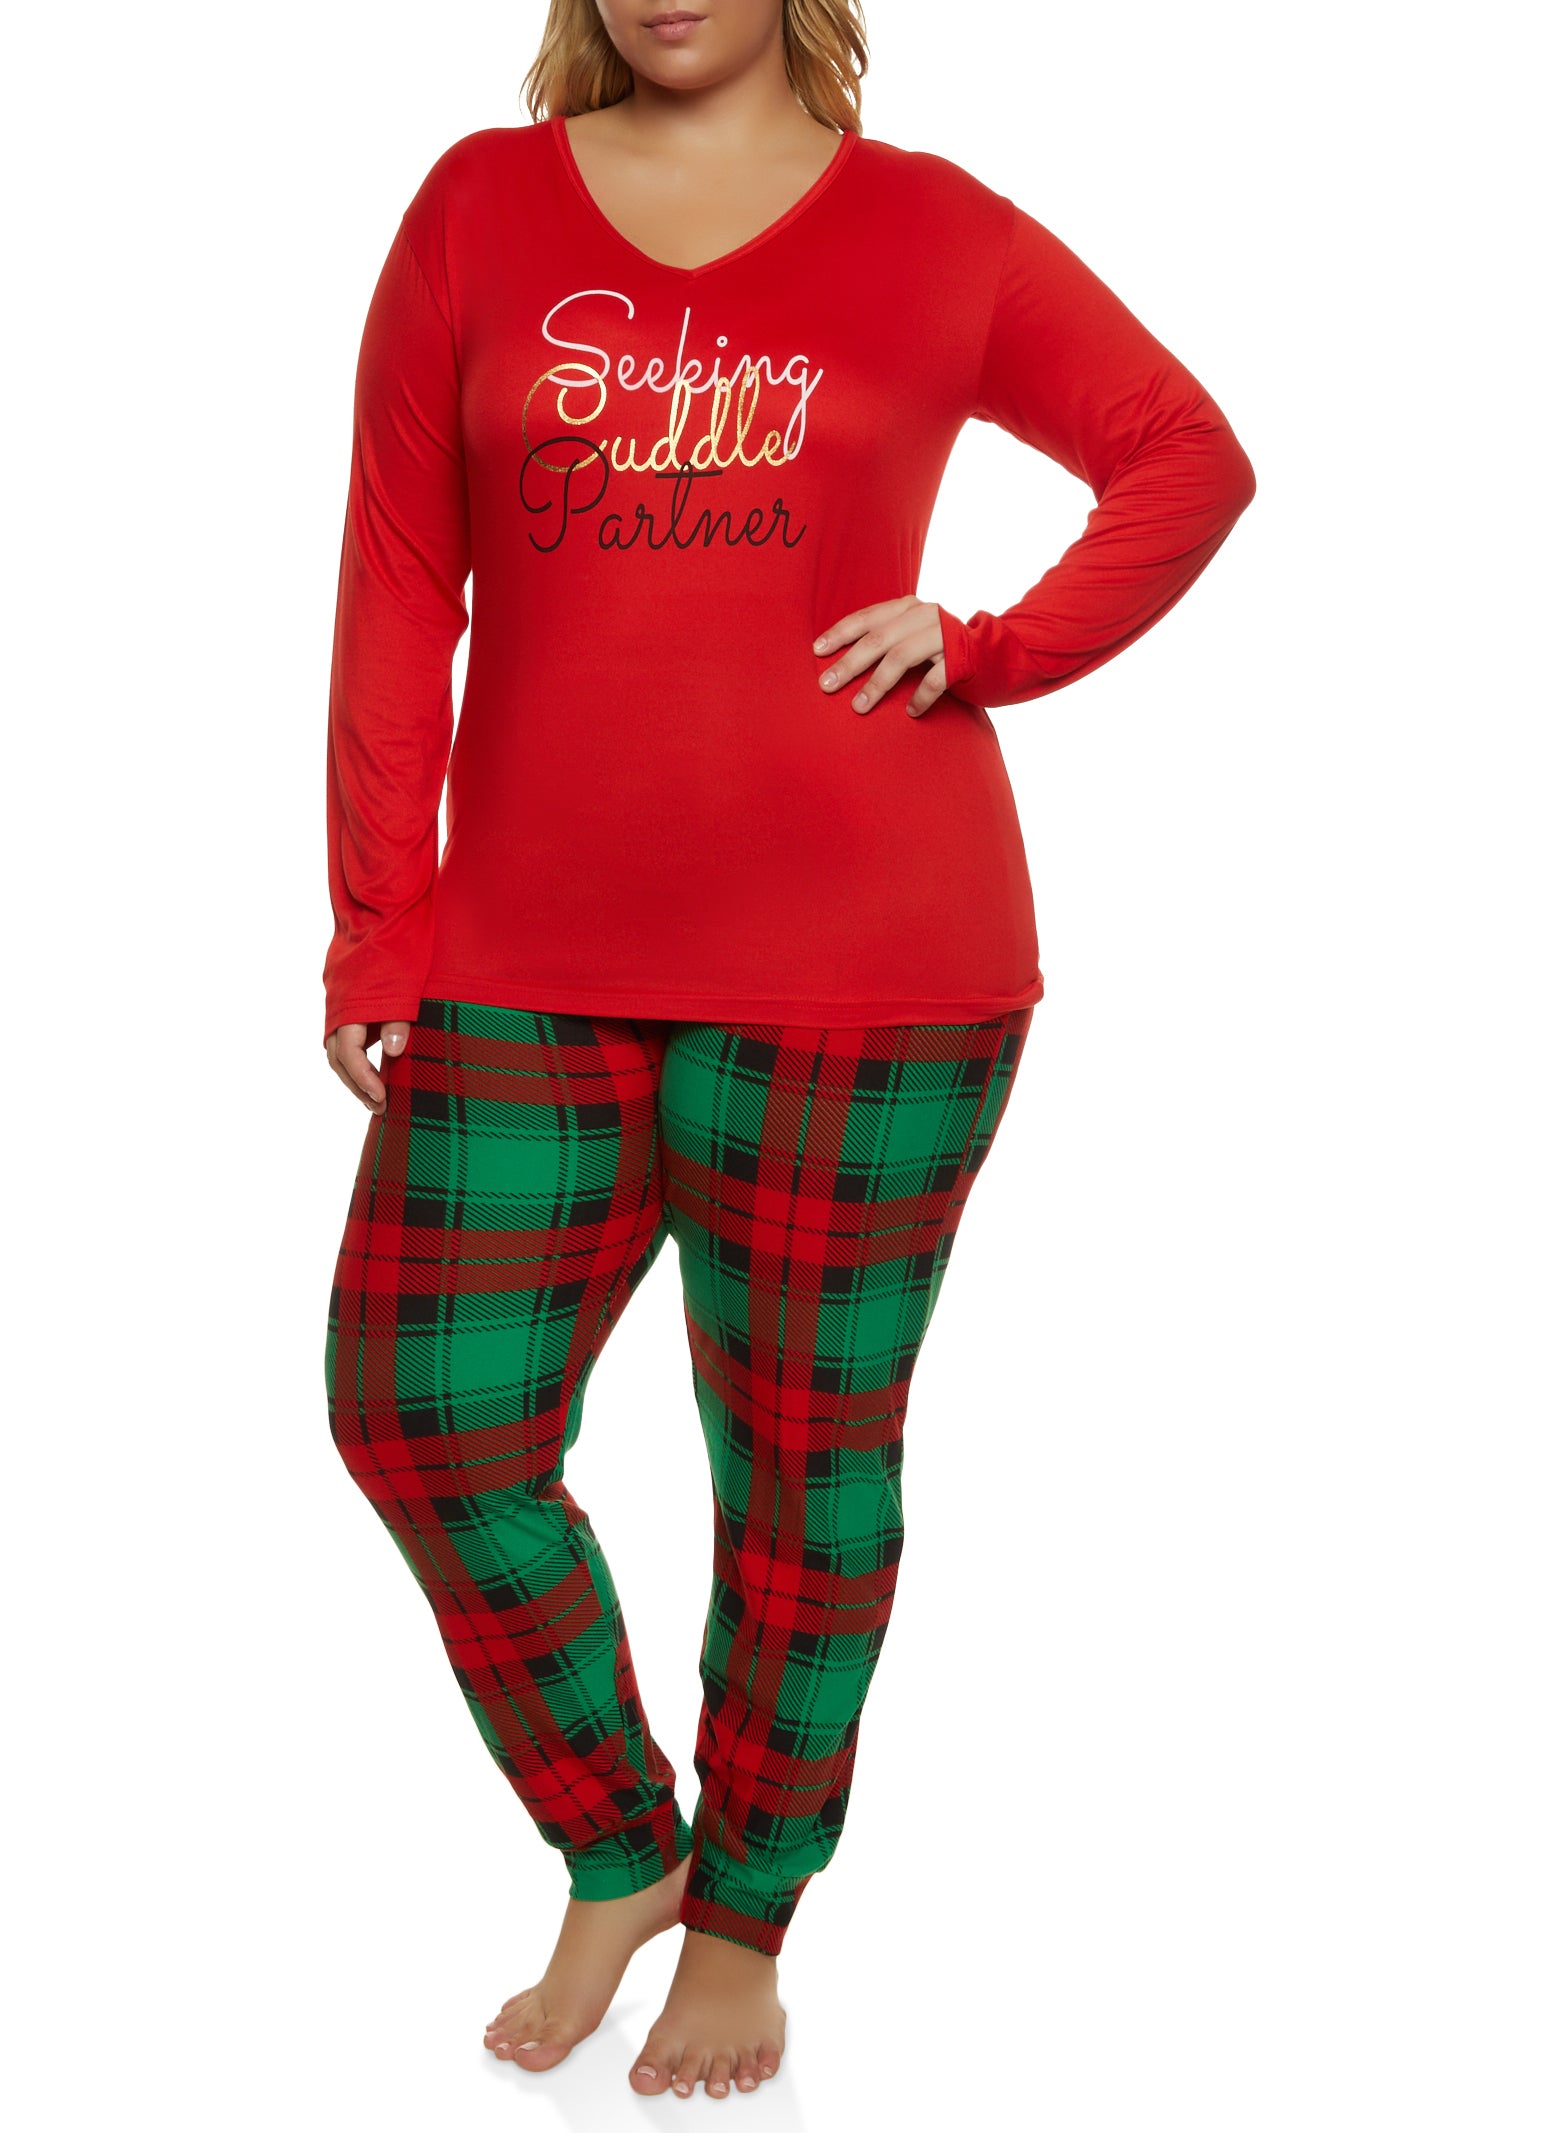 Plus Size Cuddle Partner Graphic Long Sleeve Pajama Top and Pants - Red